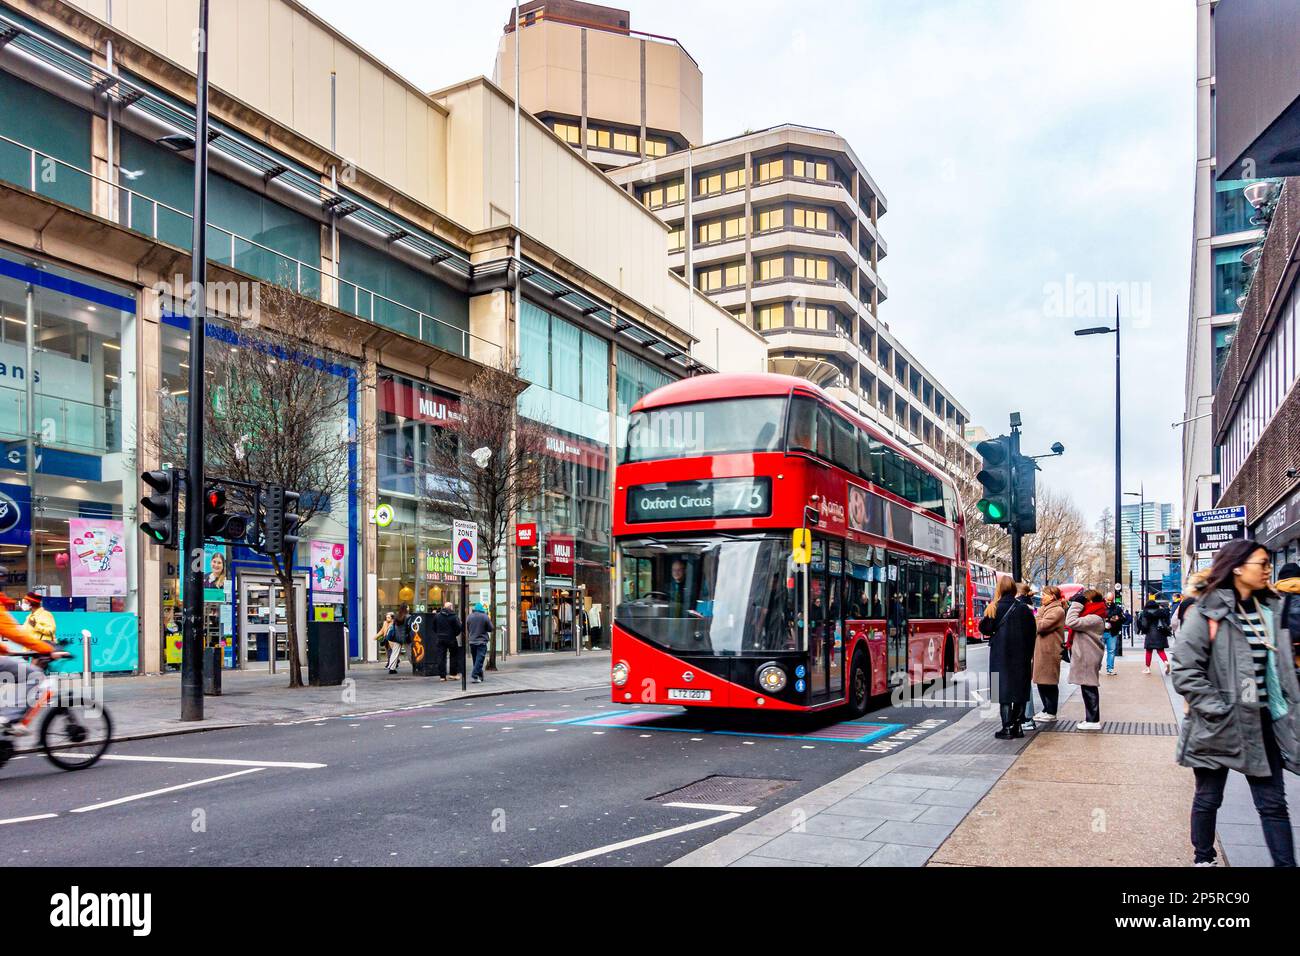 An iconic, red, London double decker bus on Tottenham Court Road Stock Photo